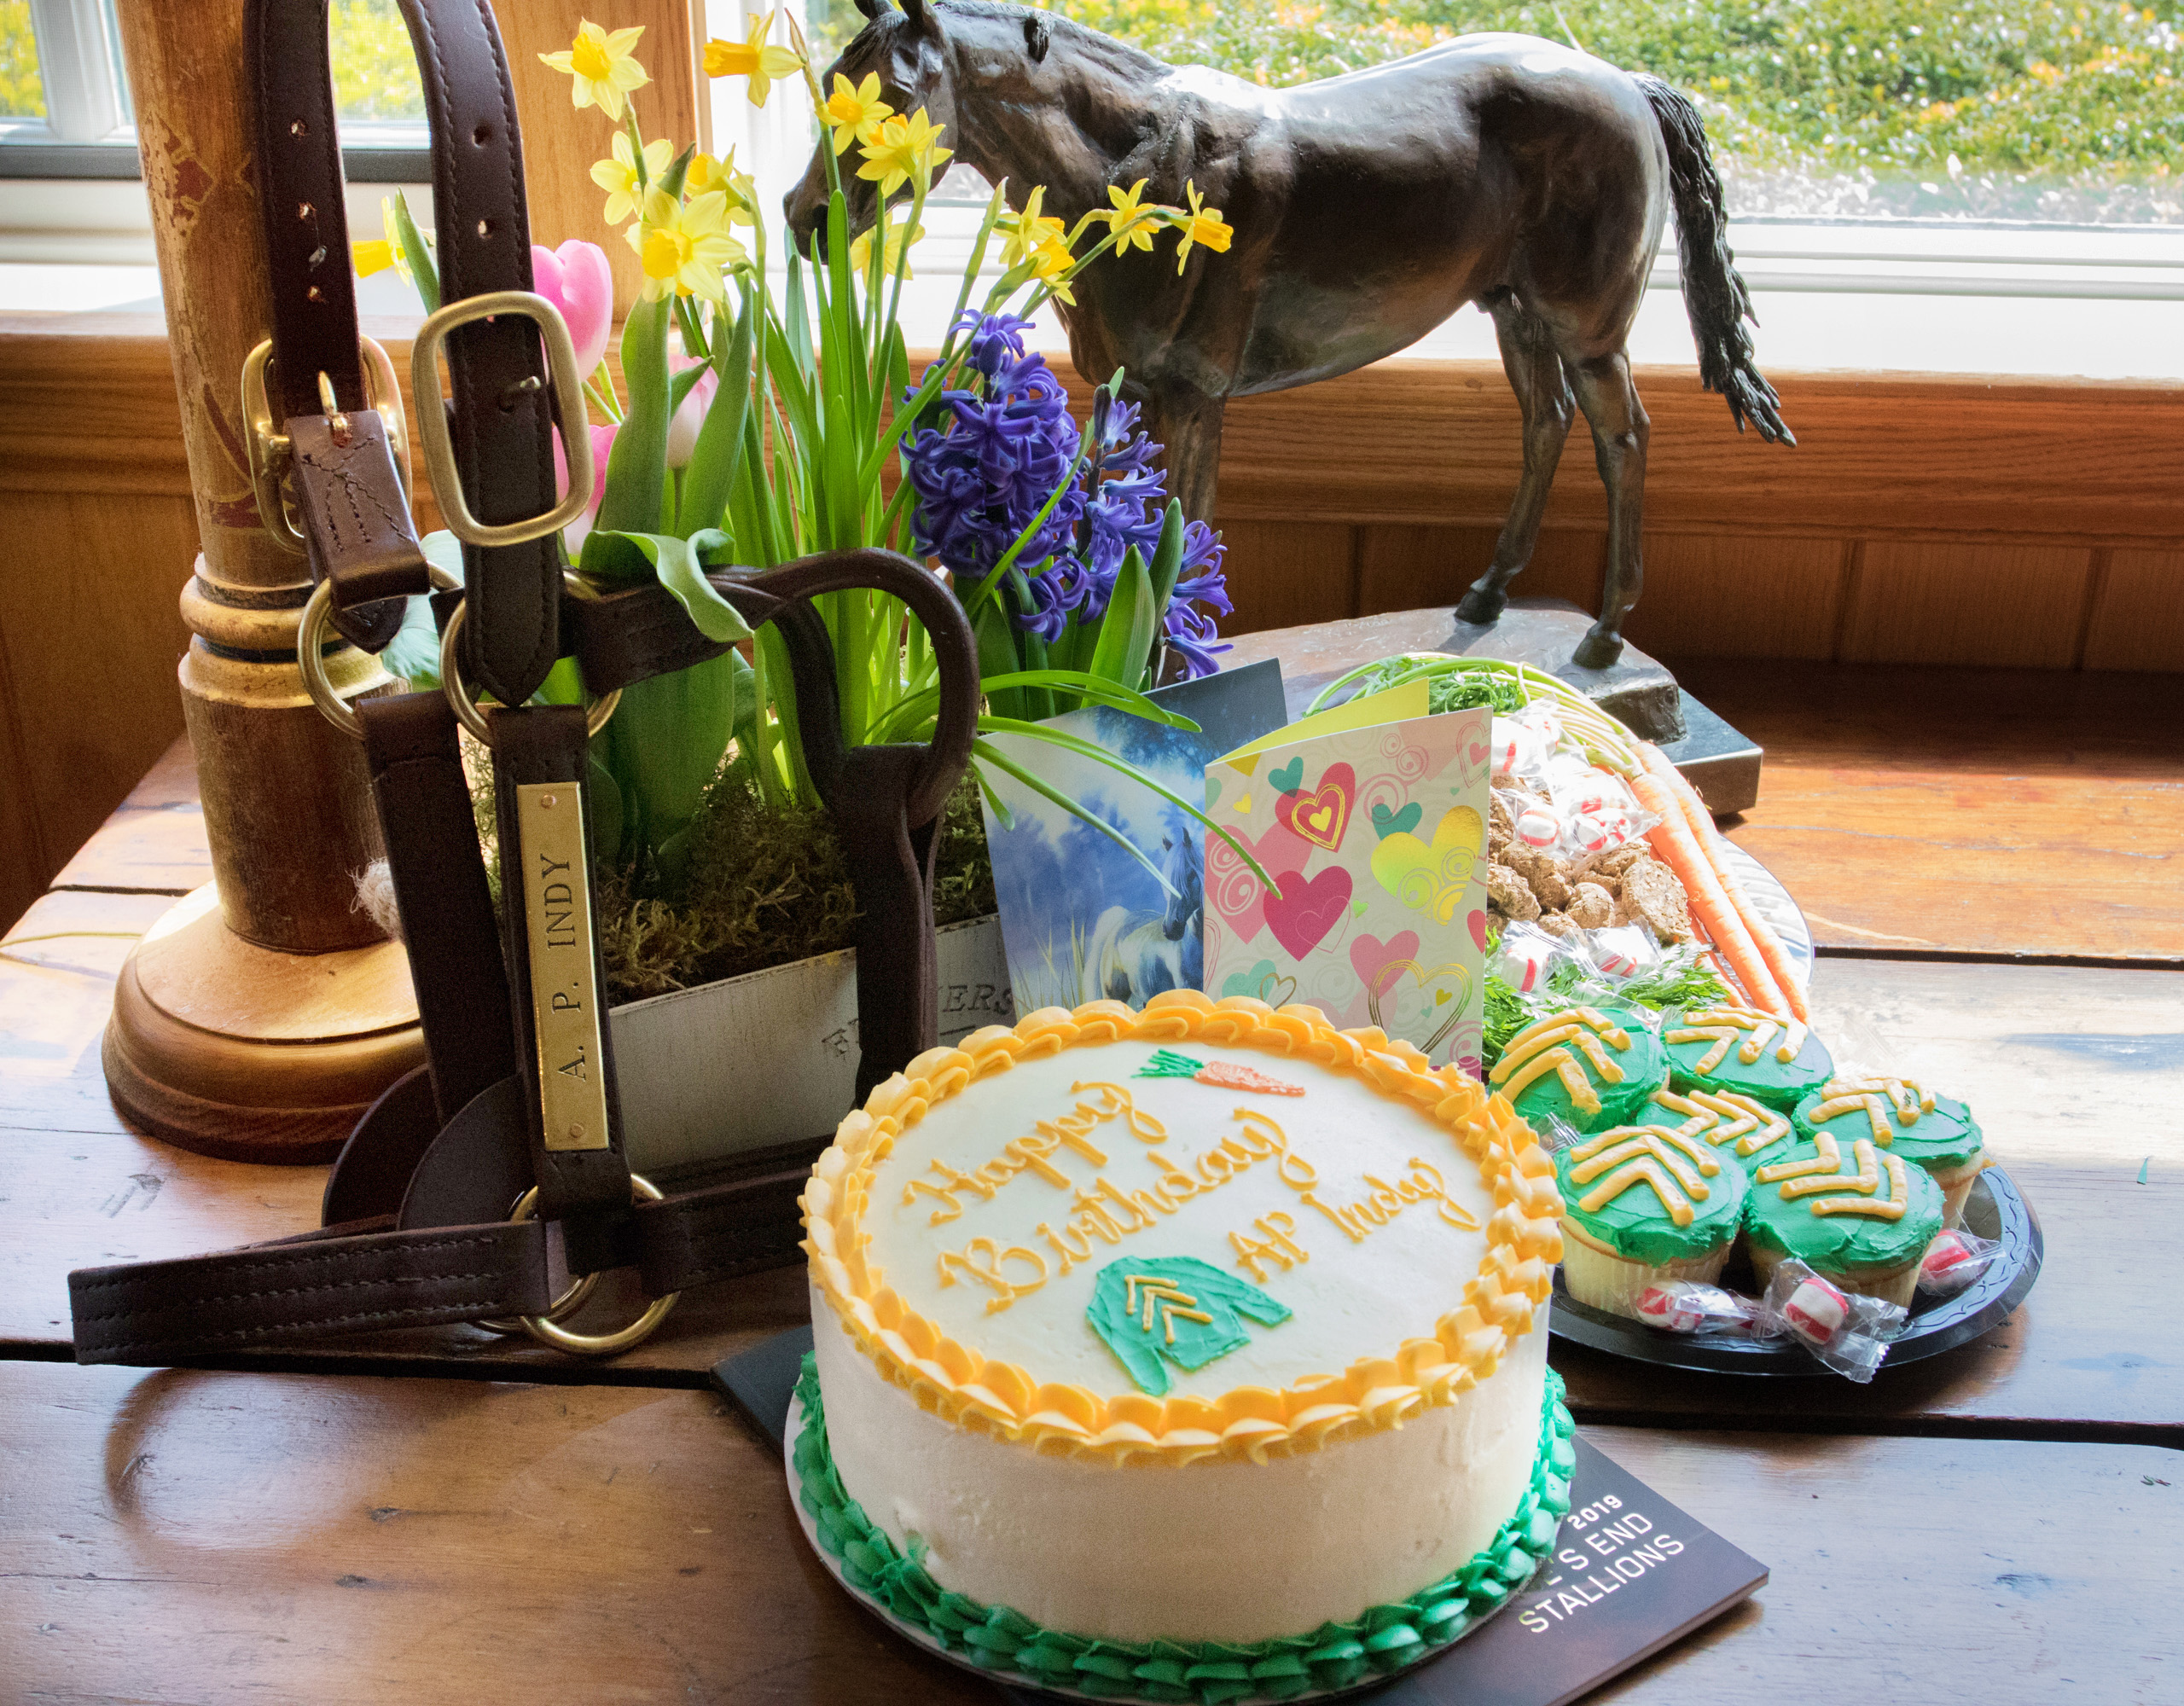 A.P. Indy halter and birthday cake